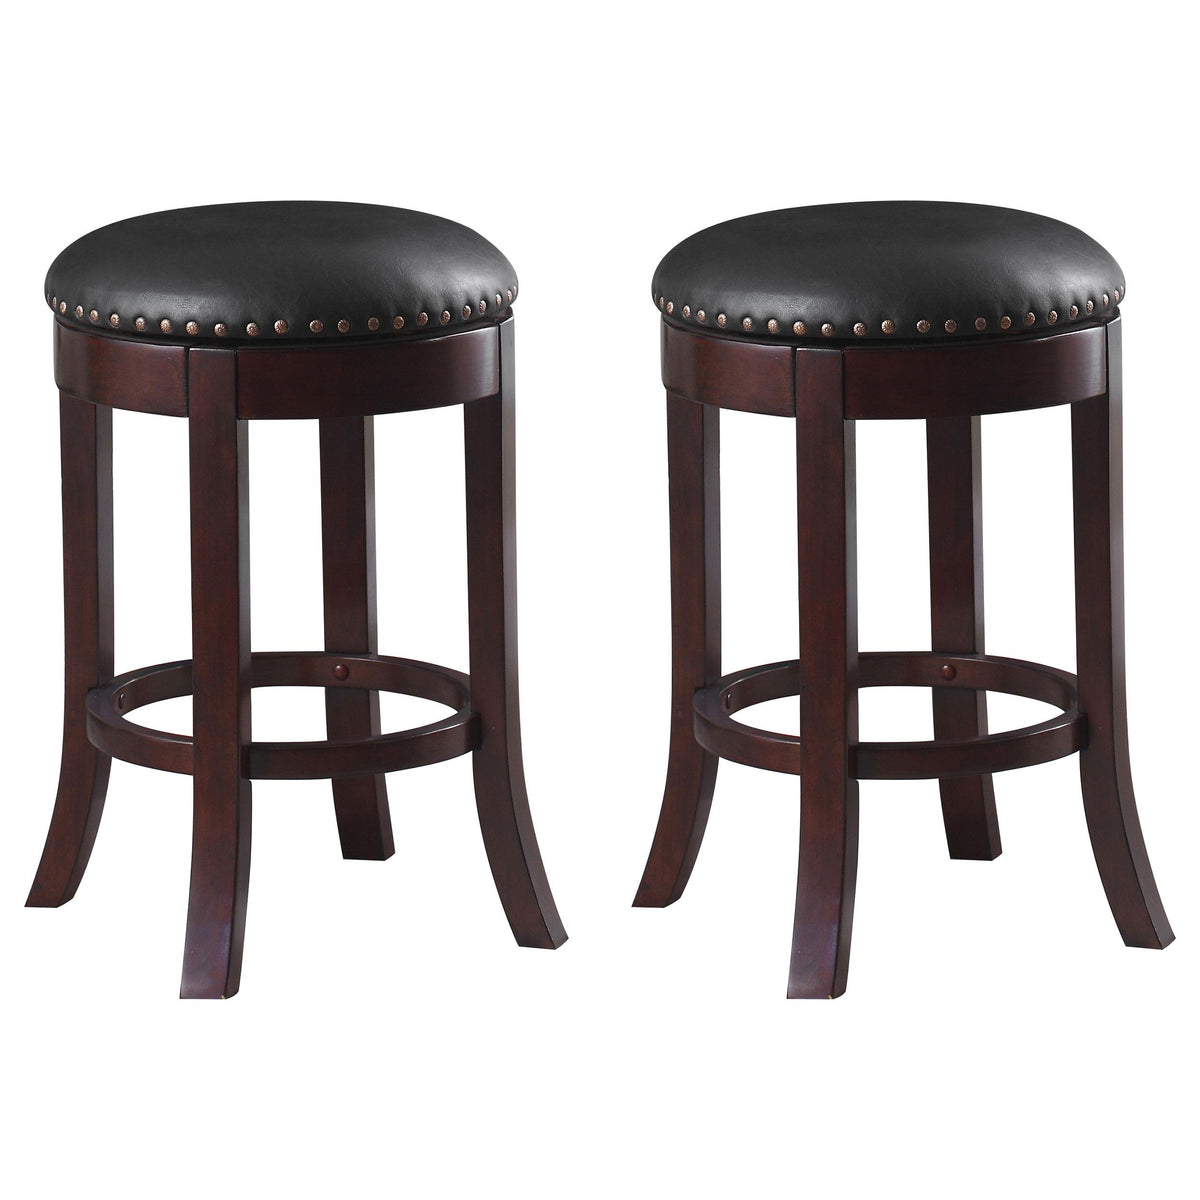 Aboushi Swivel Counter Height Stools with Upholstered Seat Brown (Set of 2)  Las Vegas Furniture Stores